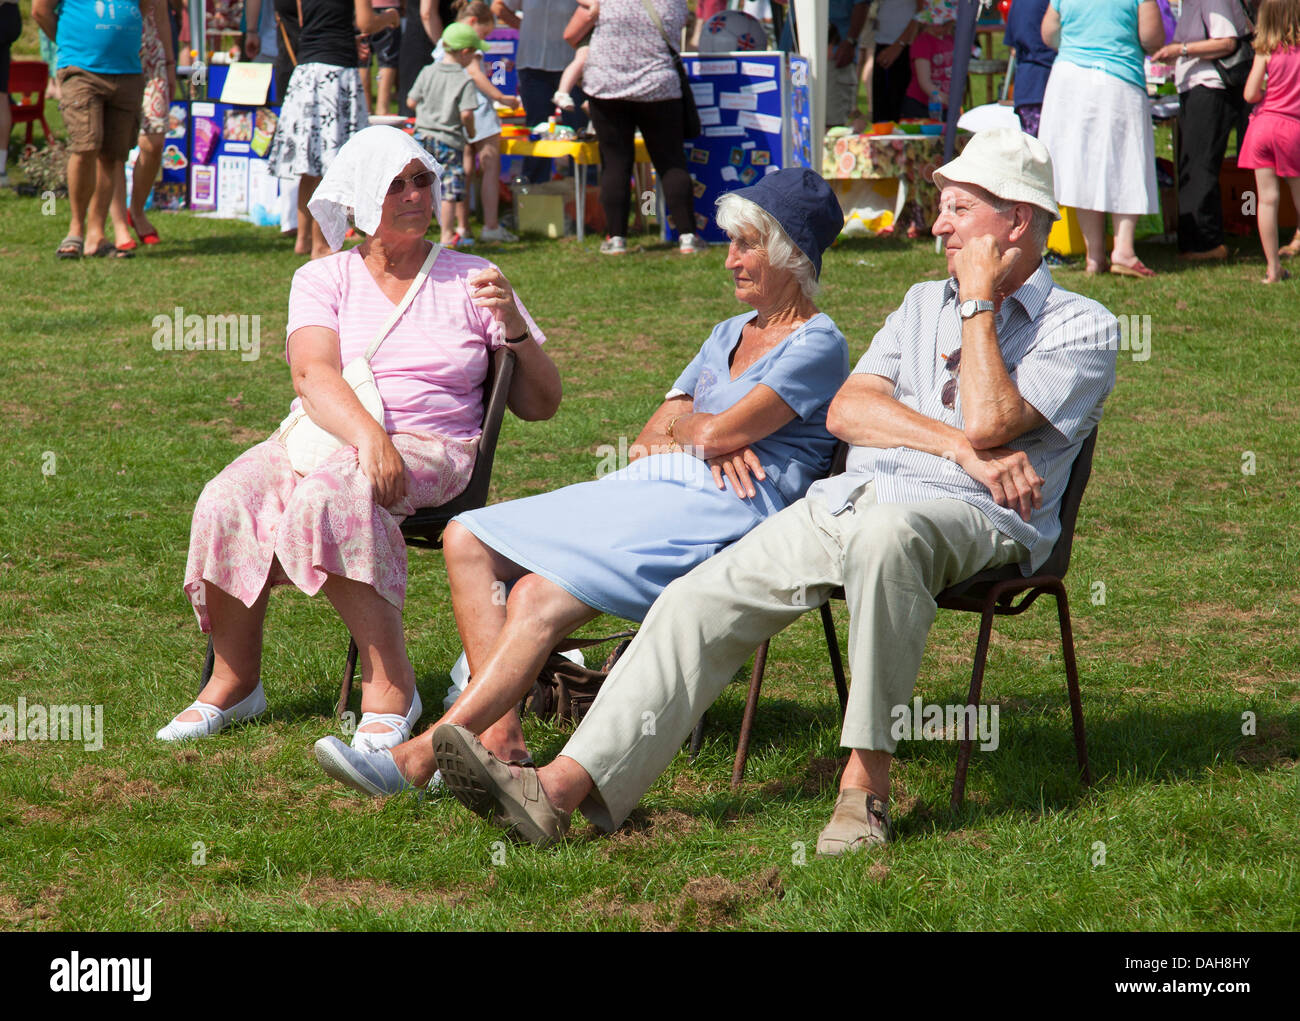 Crich, Derbyshire, U.K. 13th July 2013. Visitors at the Crich village fete wear sun hats as the UK swelters in the heatwave. Credit:  Mark Richardson/Alamy Live News Stock Photo